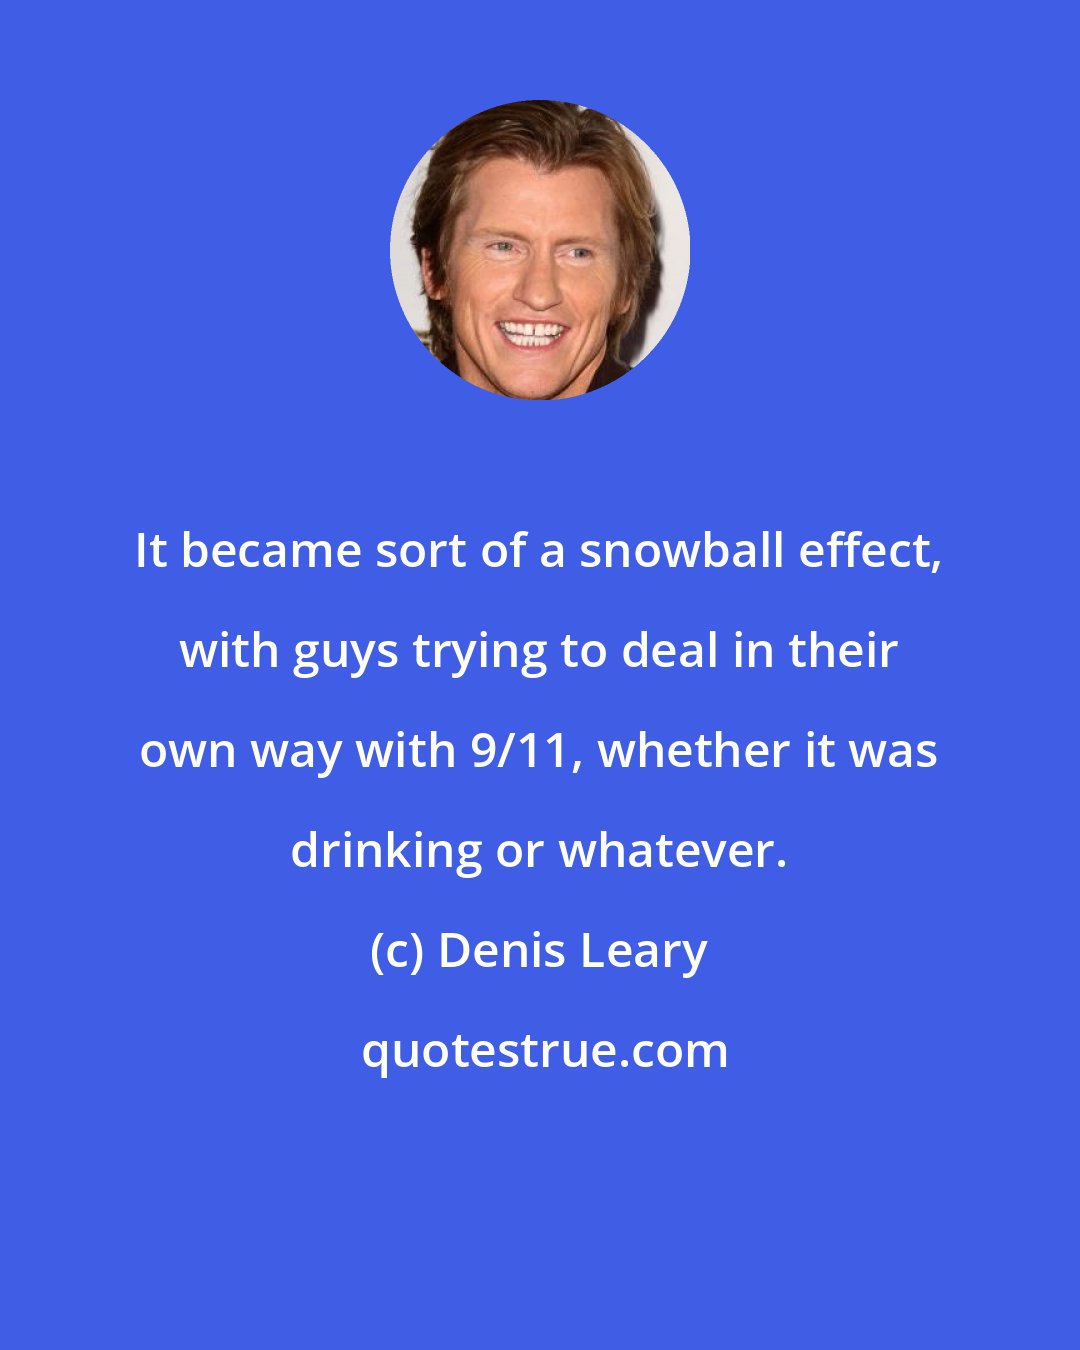 Denis Leary: It became sort of a snowball effect, with guys trying to deal in their own way with 9/11, whether it was drinking or whatever.